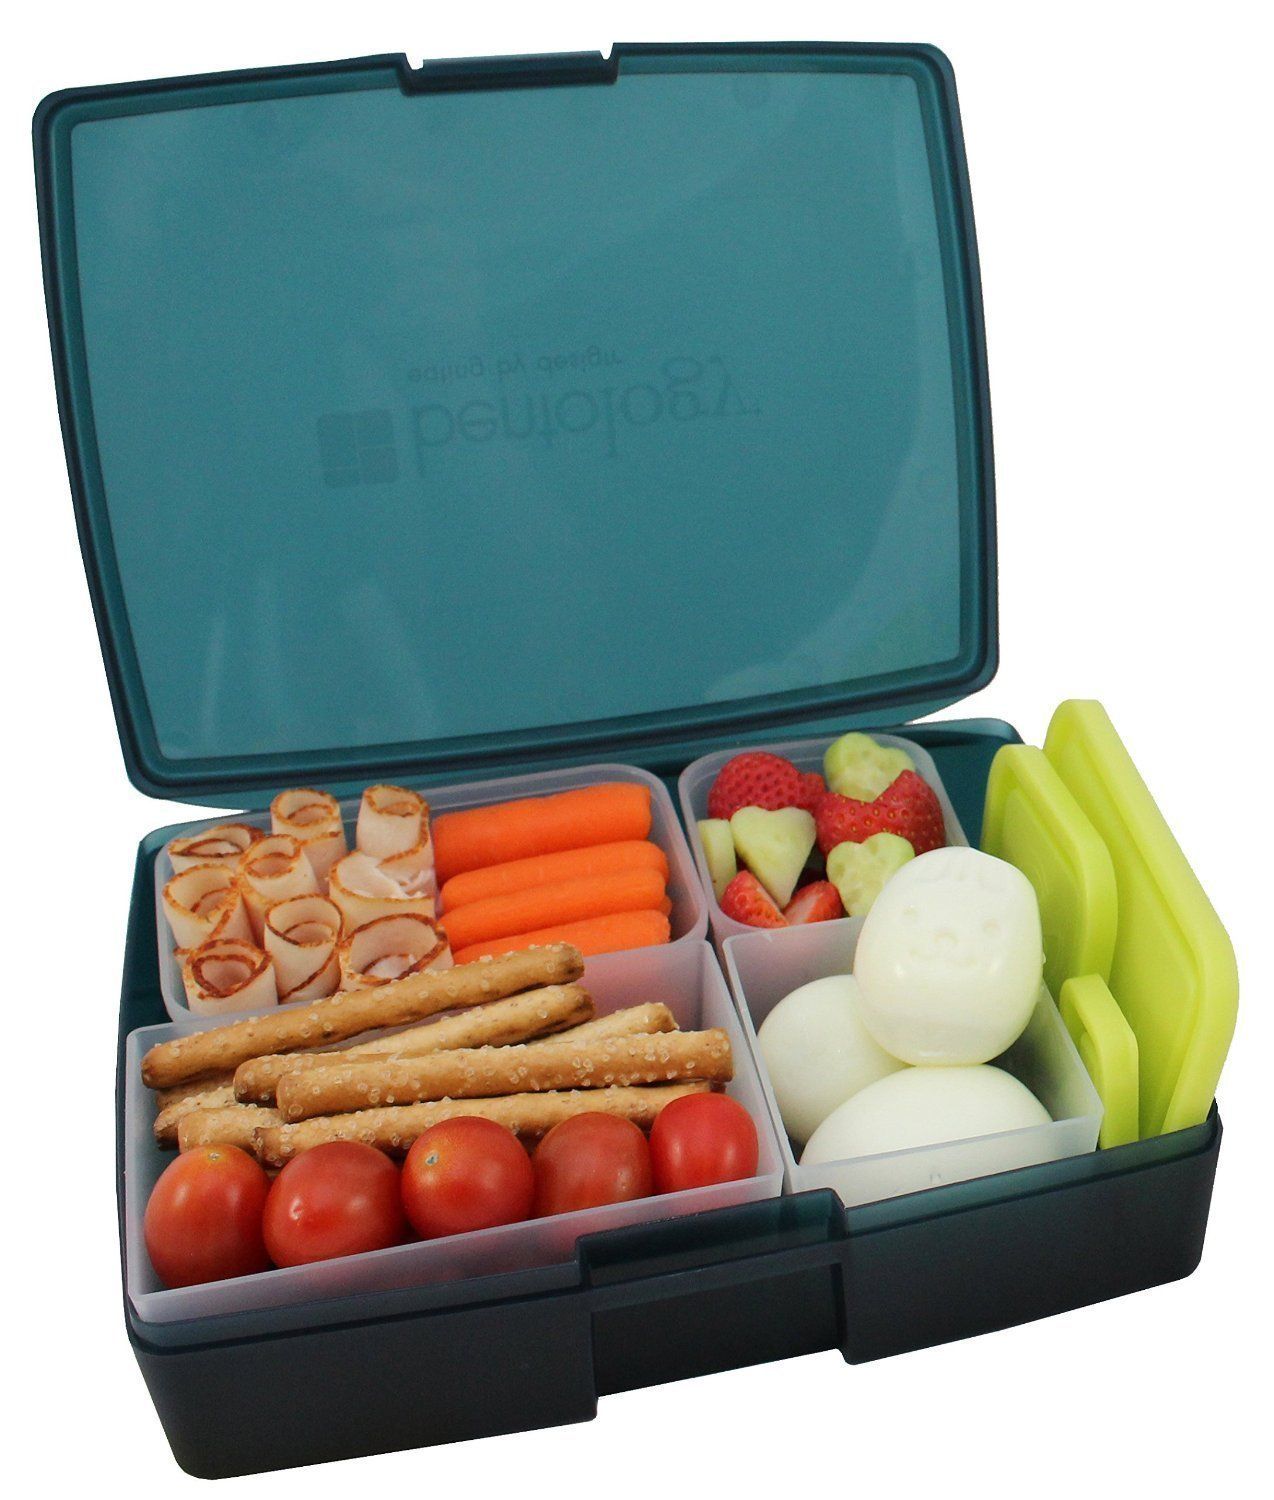 THE BEST LUNCH BOX ACCESSORIES FOR ADULTS - The Meal Planning Method